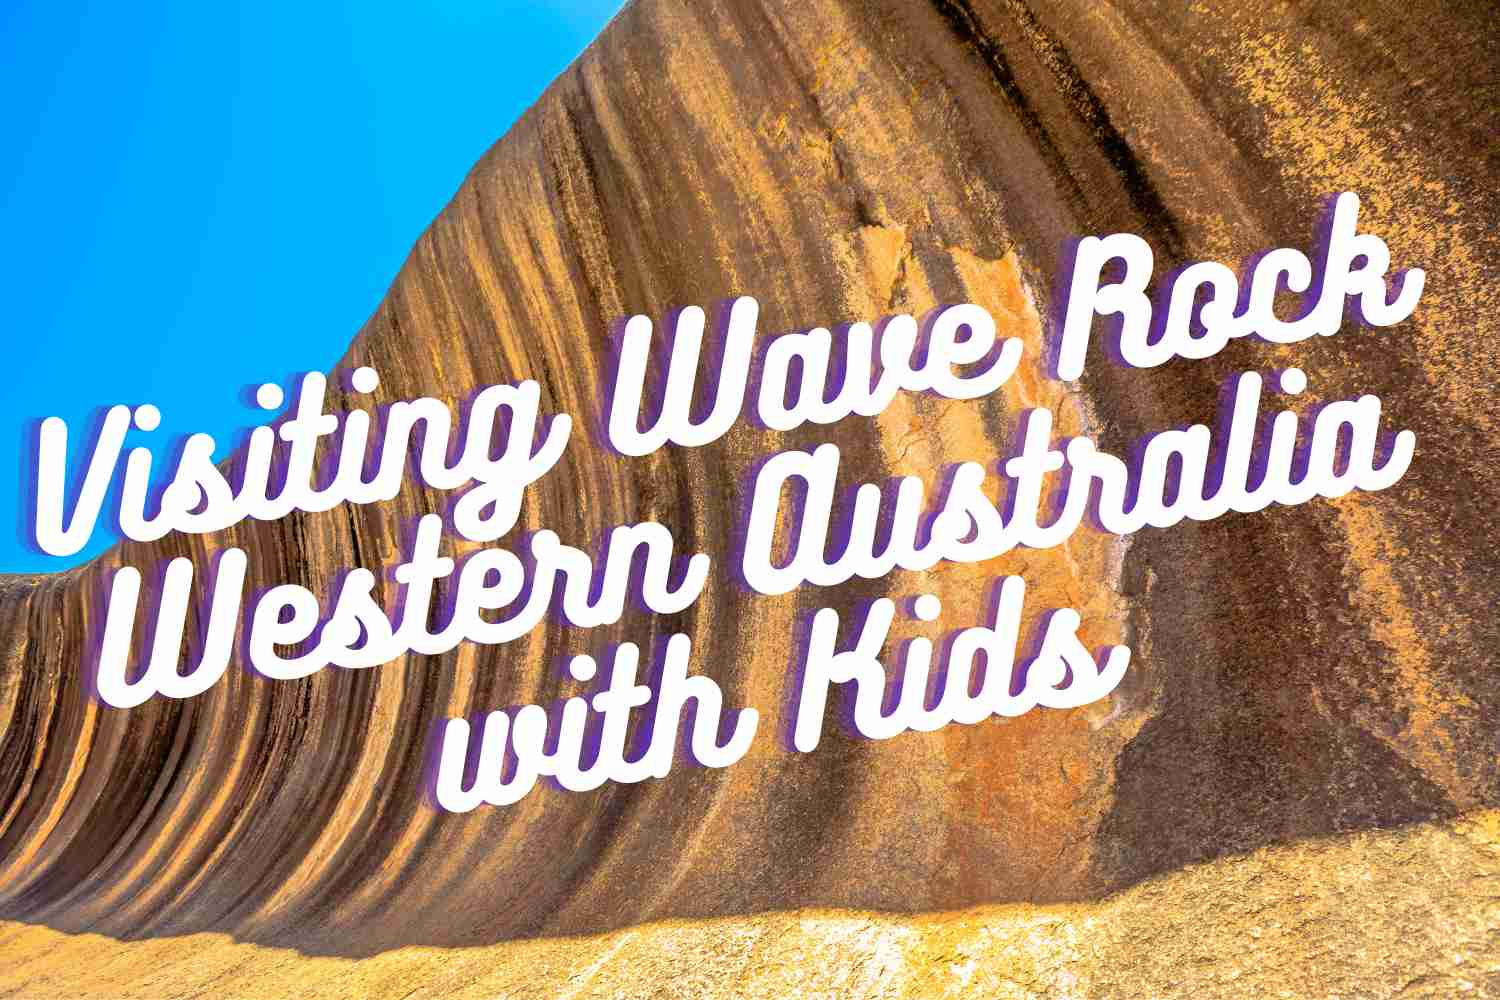 An article on visiting Cave Rock in Western Australia with kids